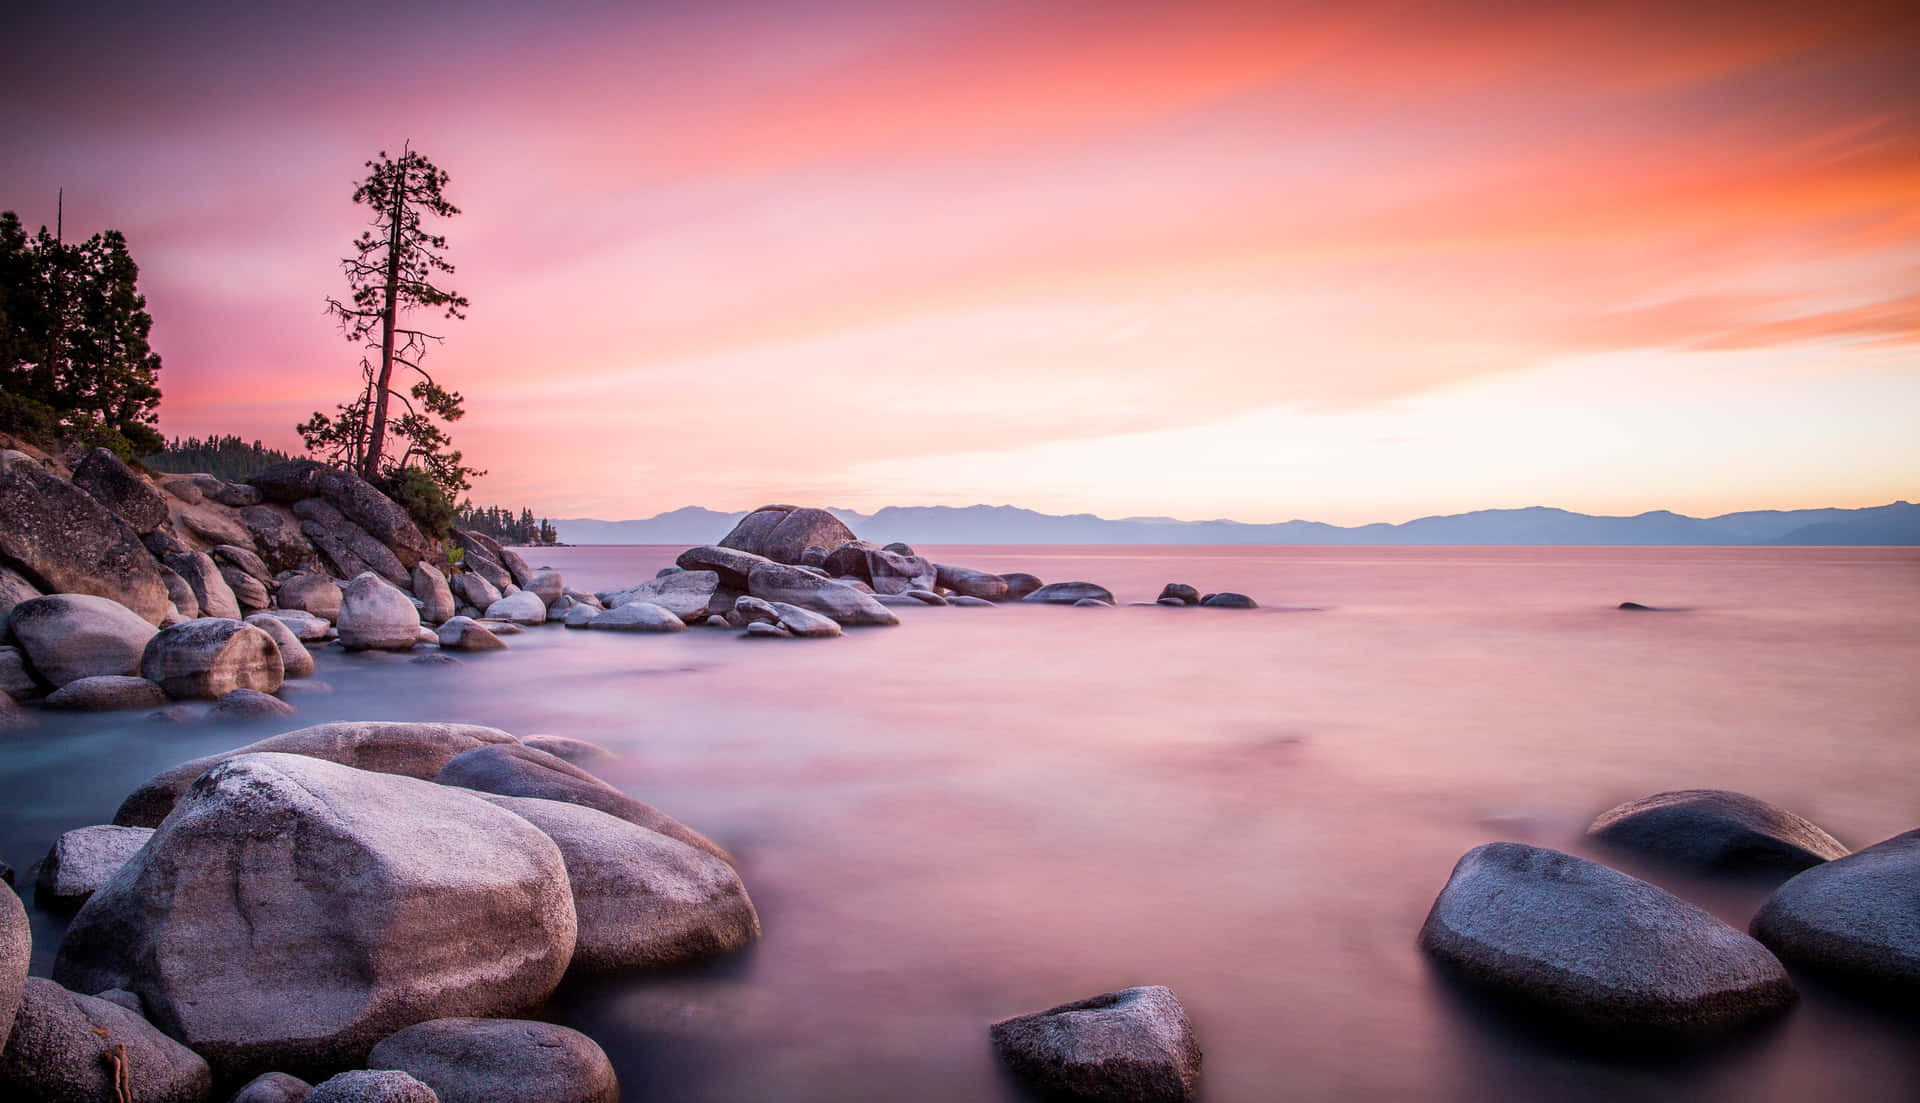 Enjoy the blessings of nature by the Lake Tahoe in California Wallpaper